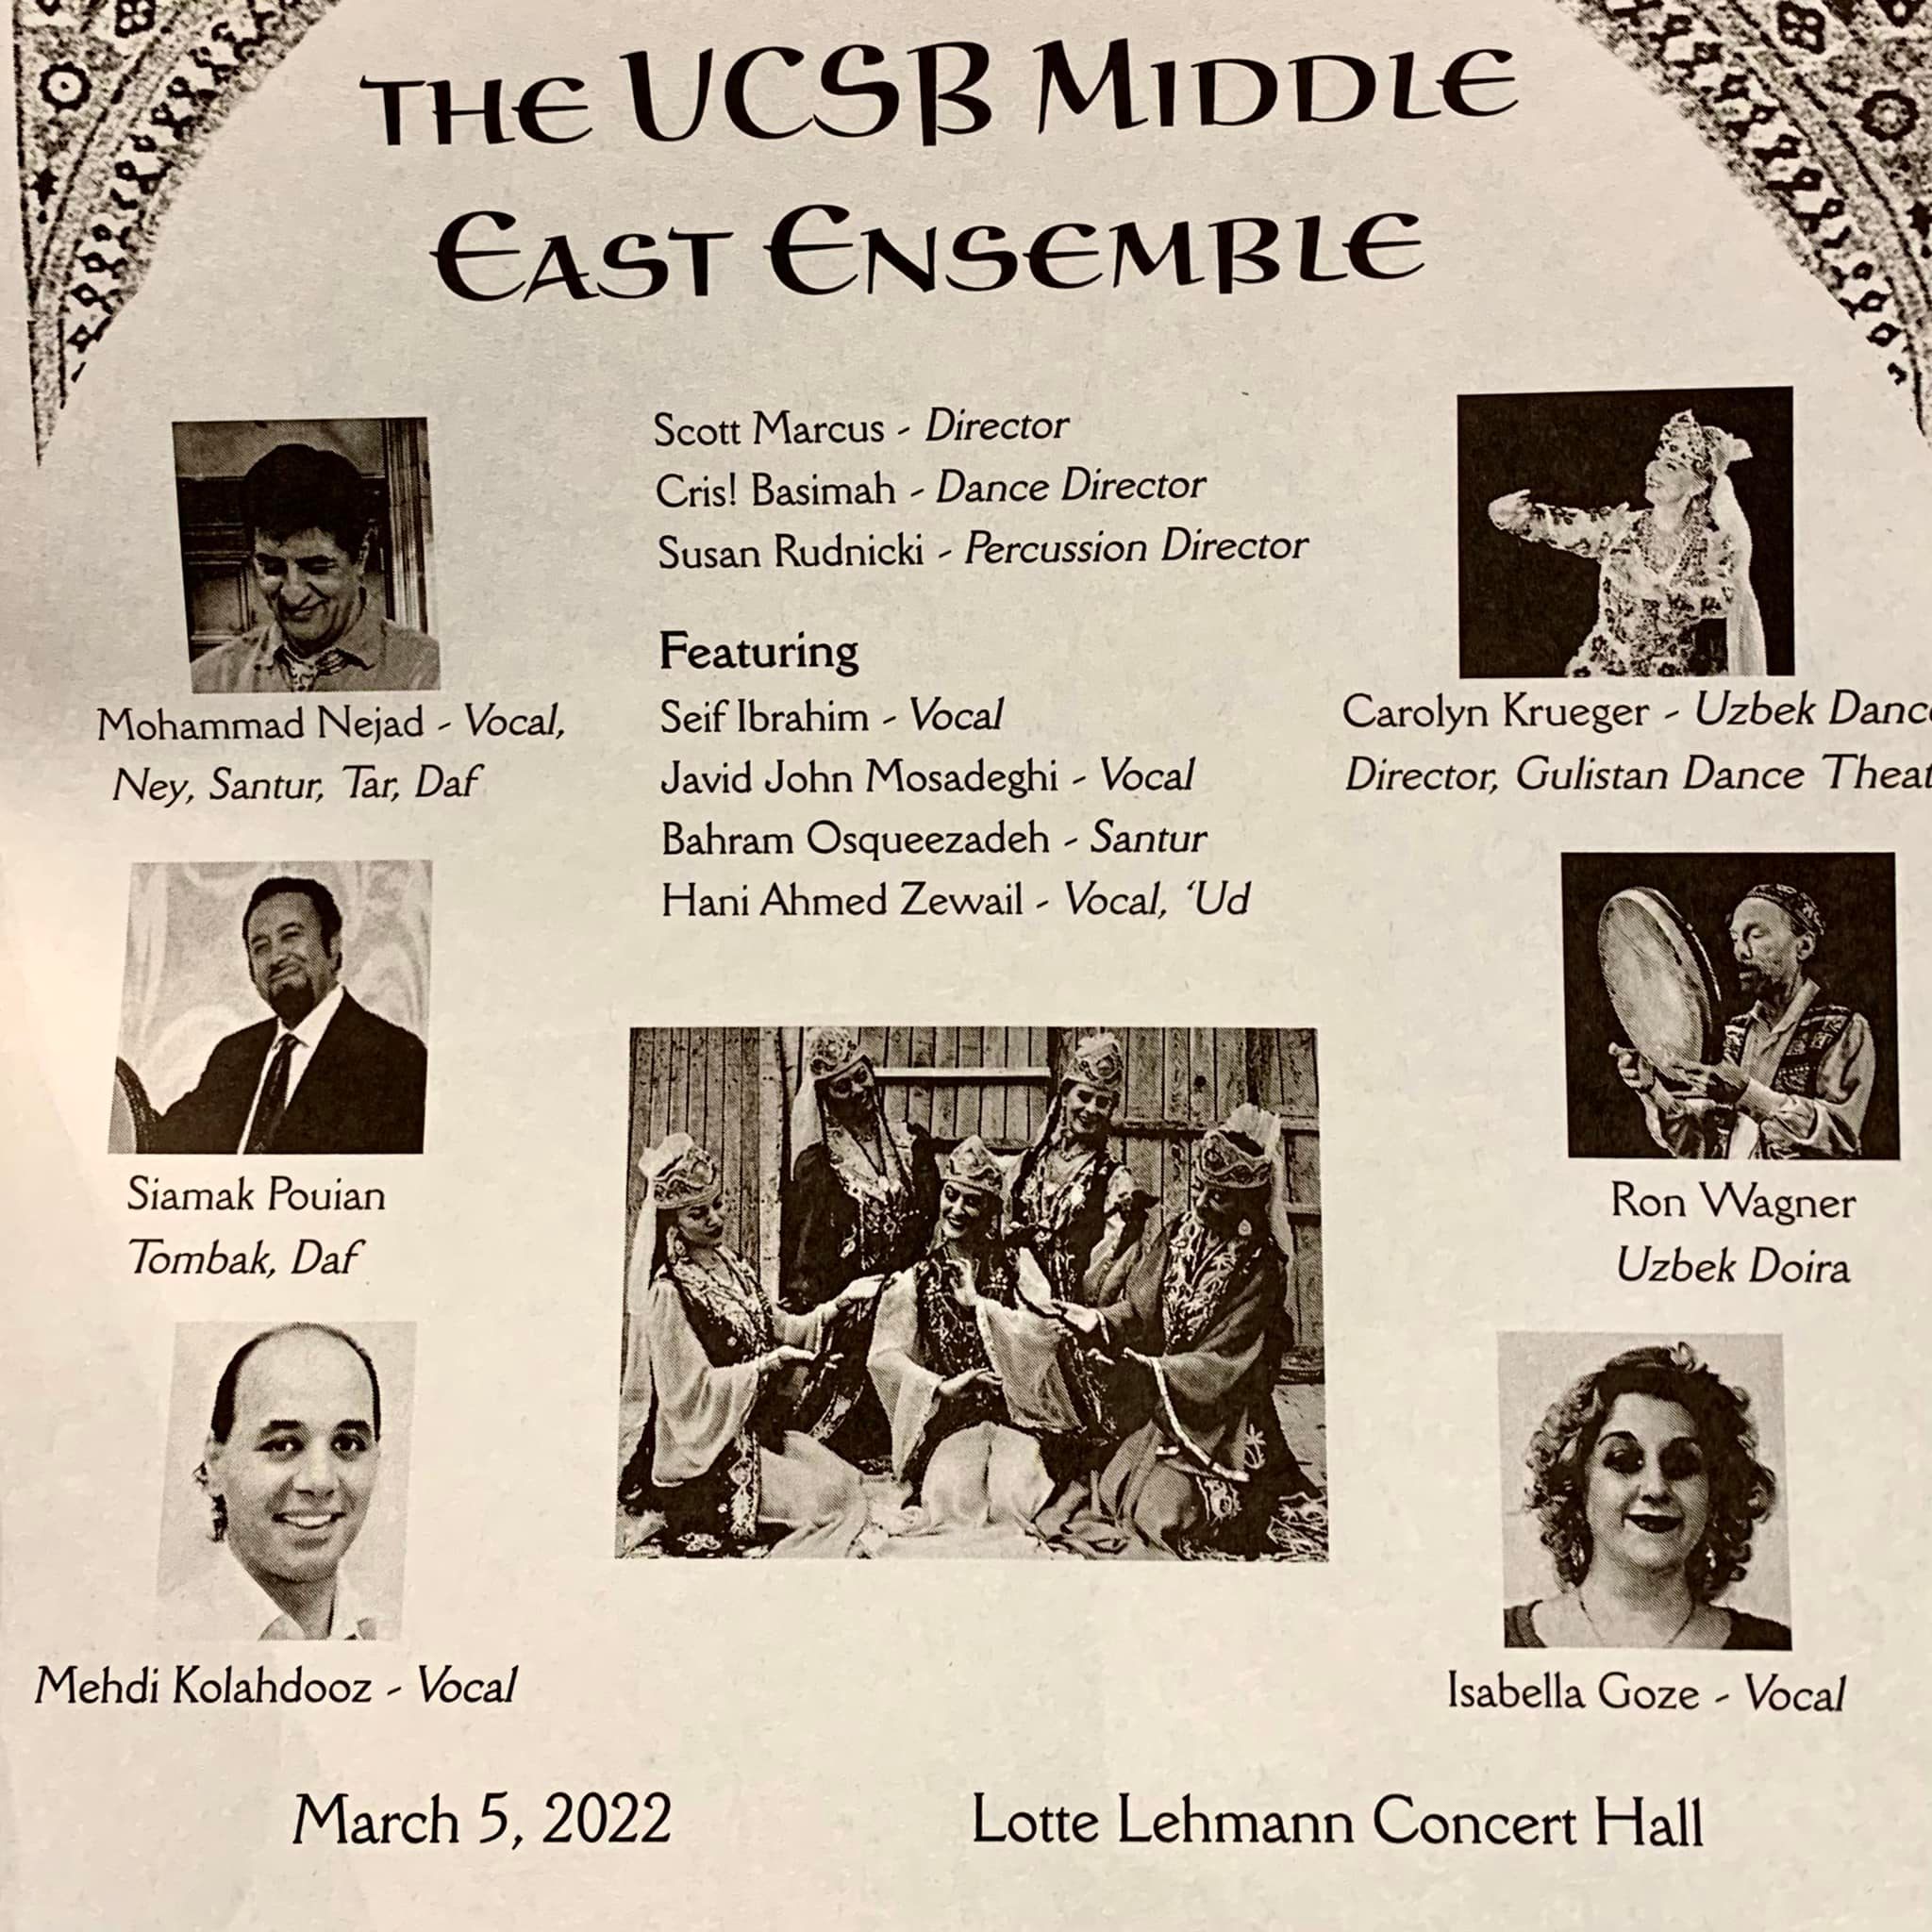 UCSB Middle East Ensemble: Cover of the March 5, 2022, concert booklet